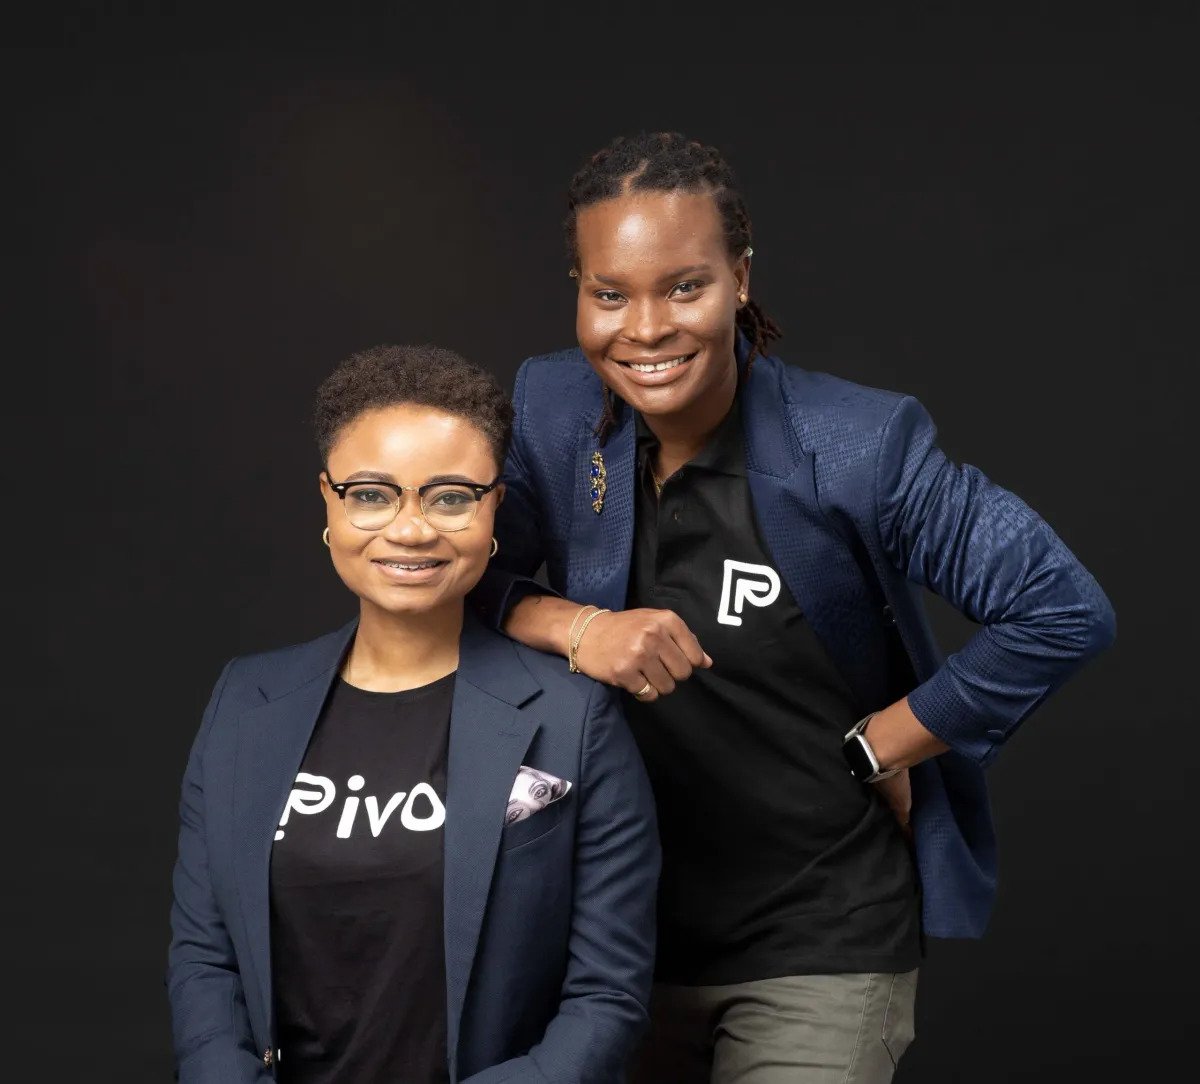 Founders of Pivo Technologies, one of the selected startups for YC S22